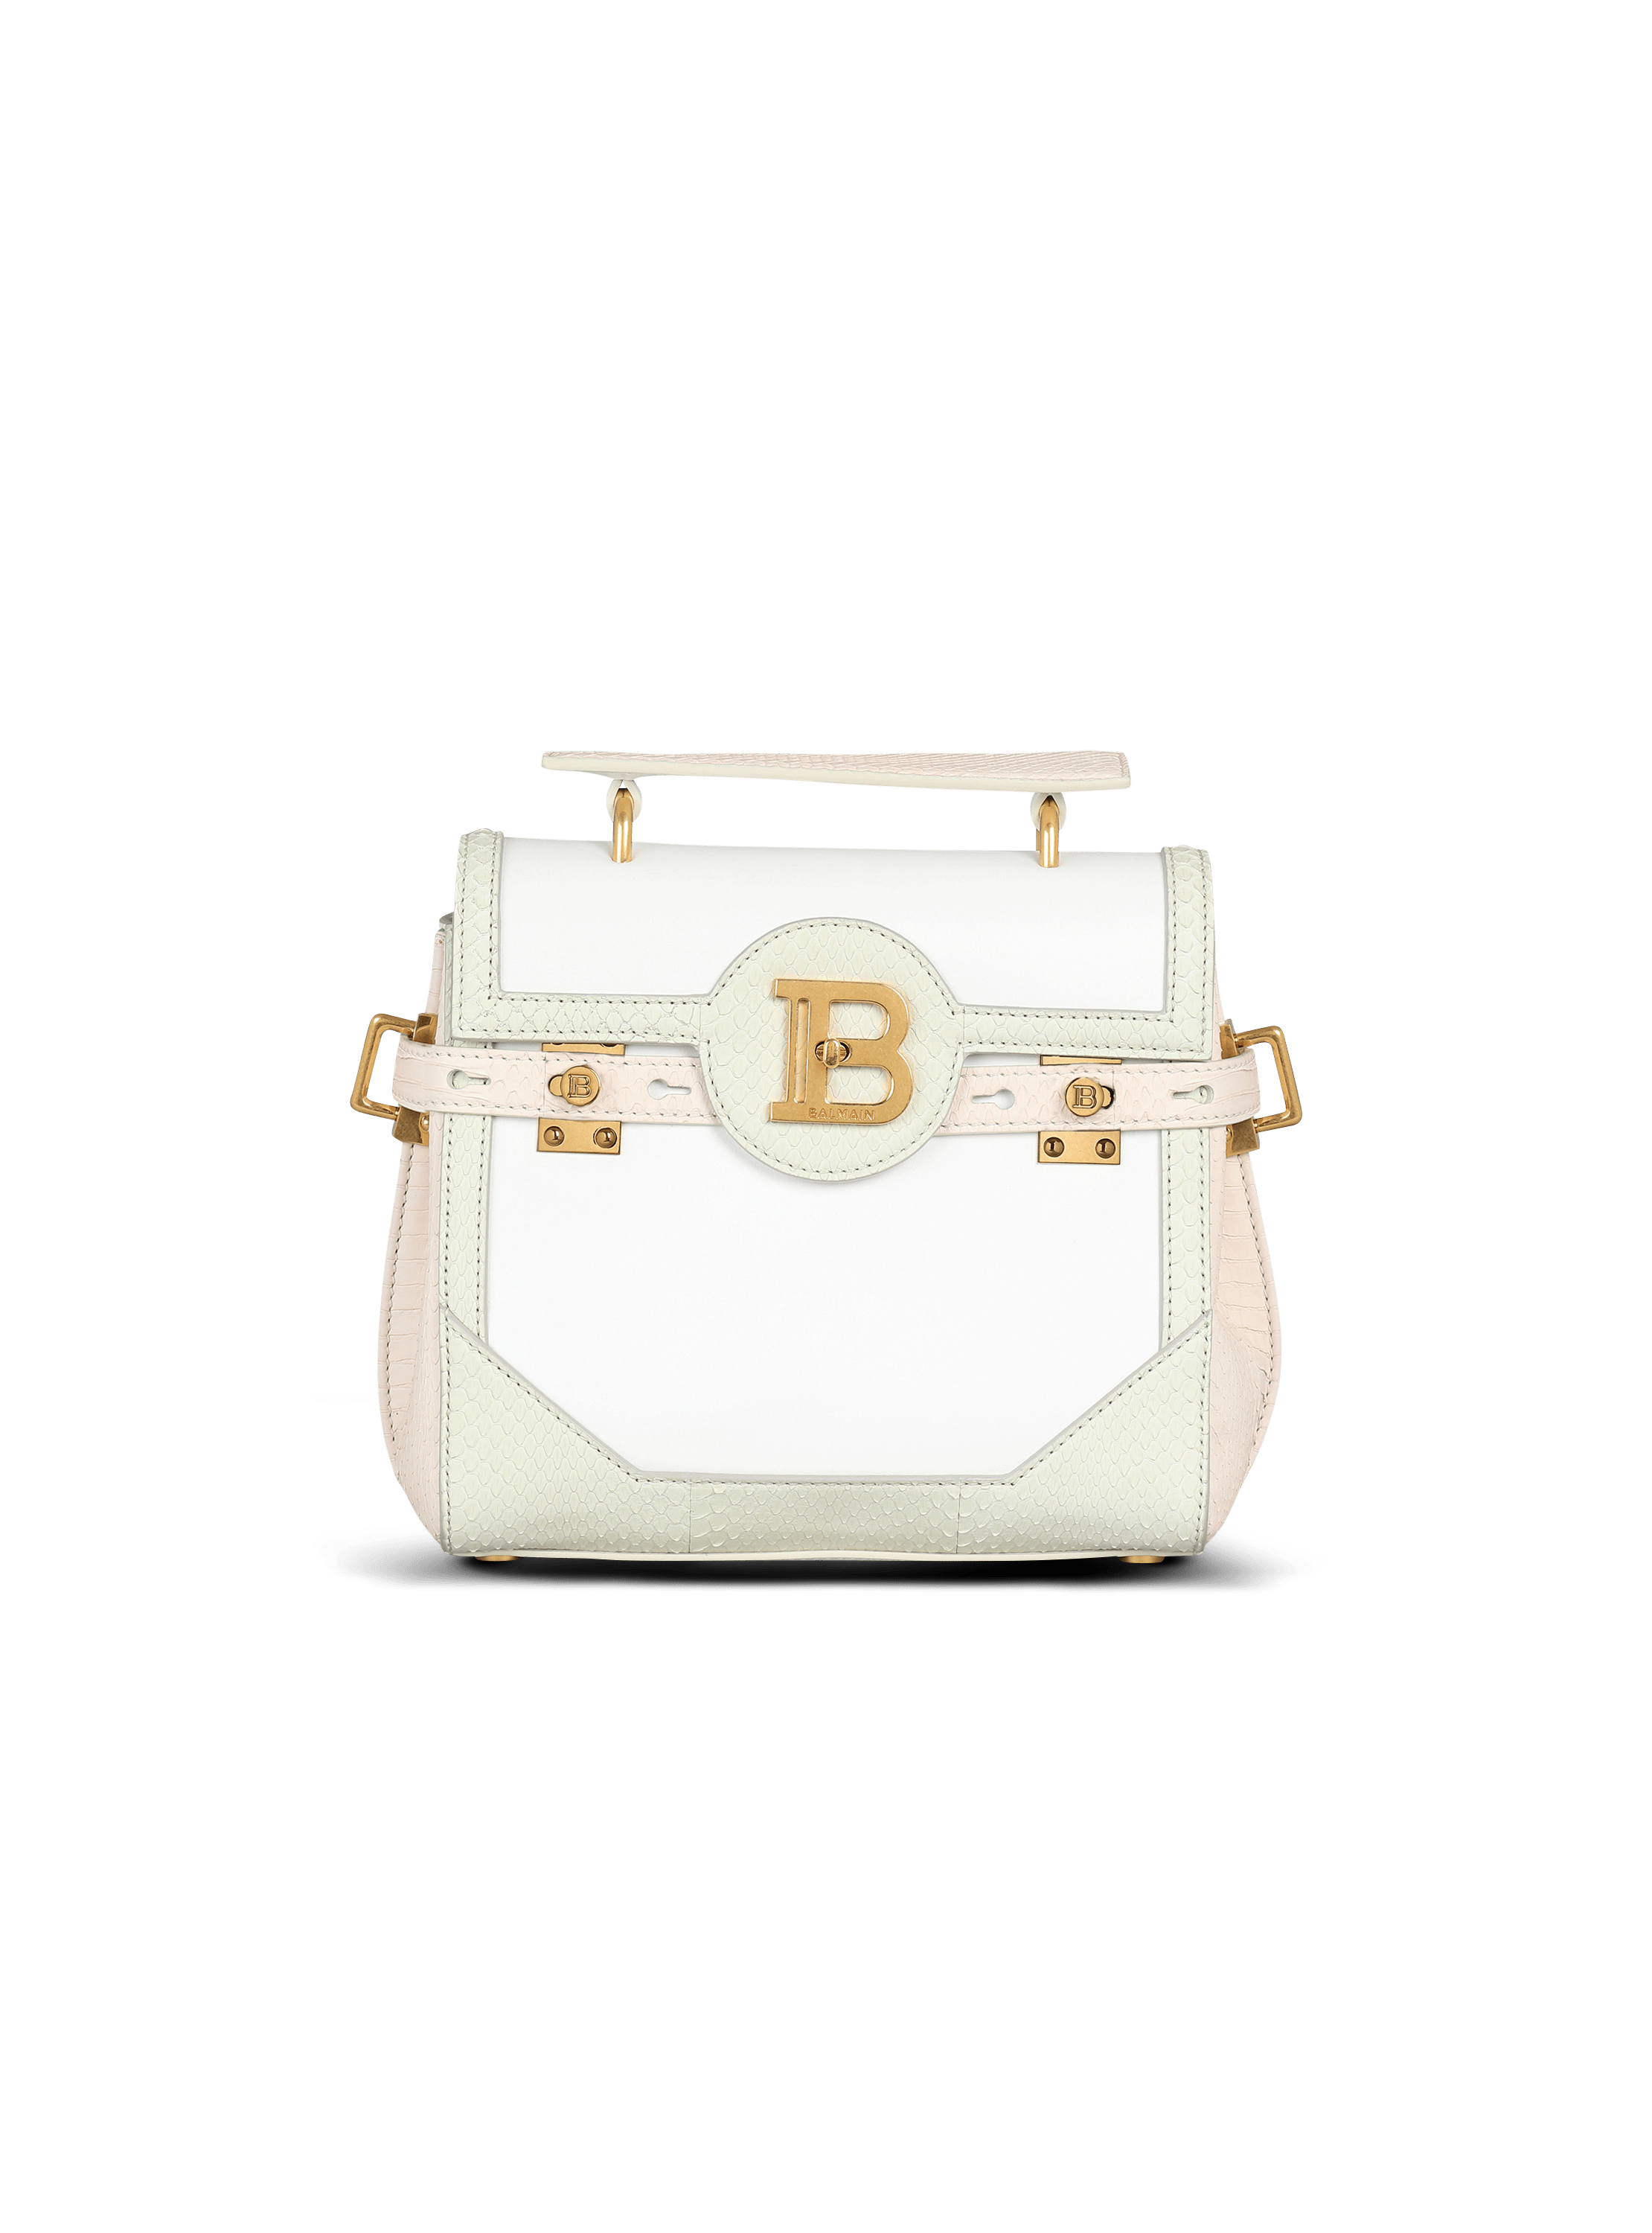 B-Buzz 23 bag in leather and python effect leather